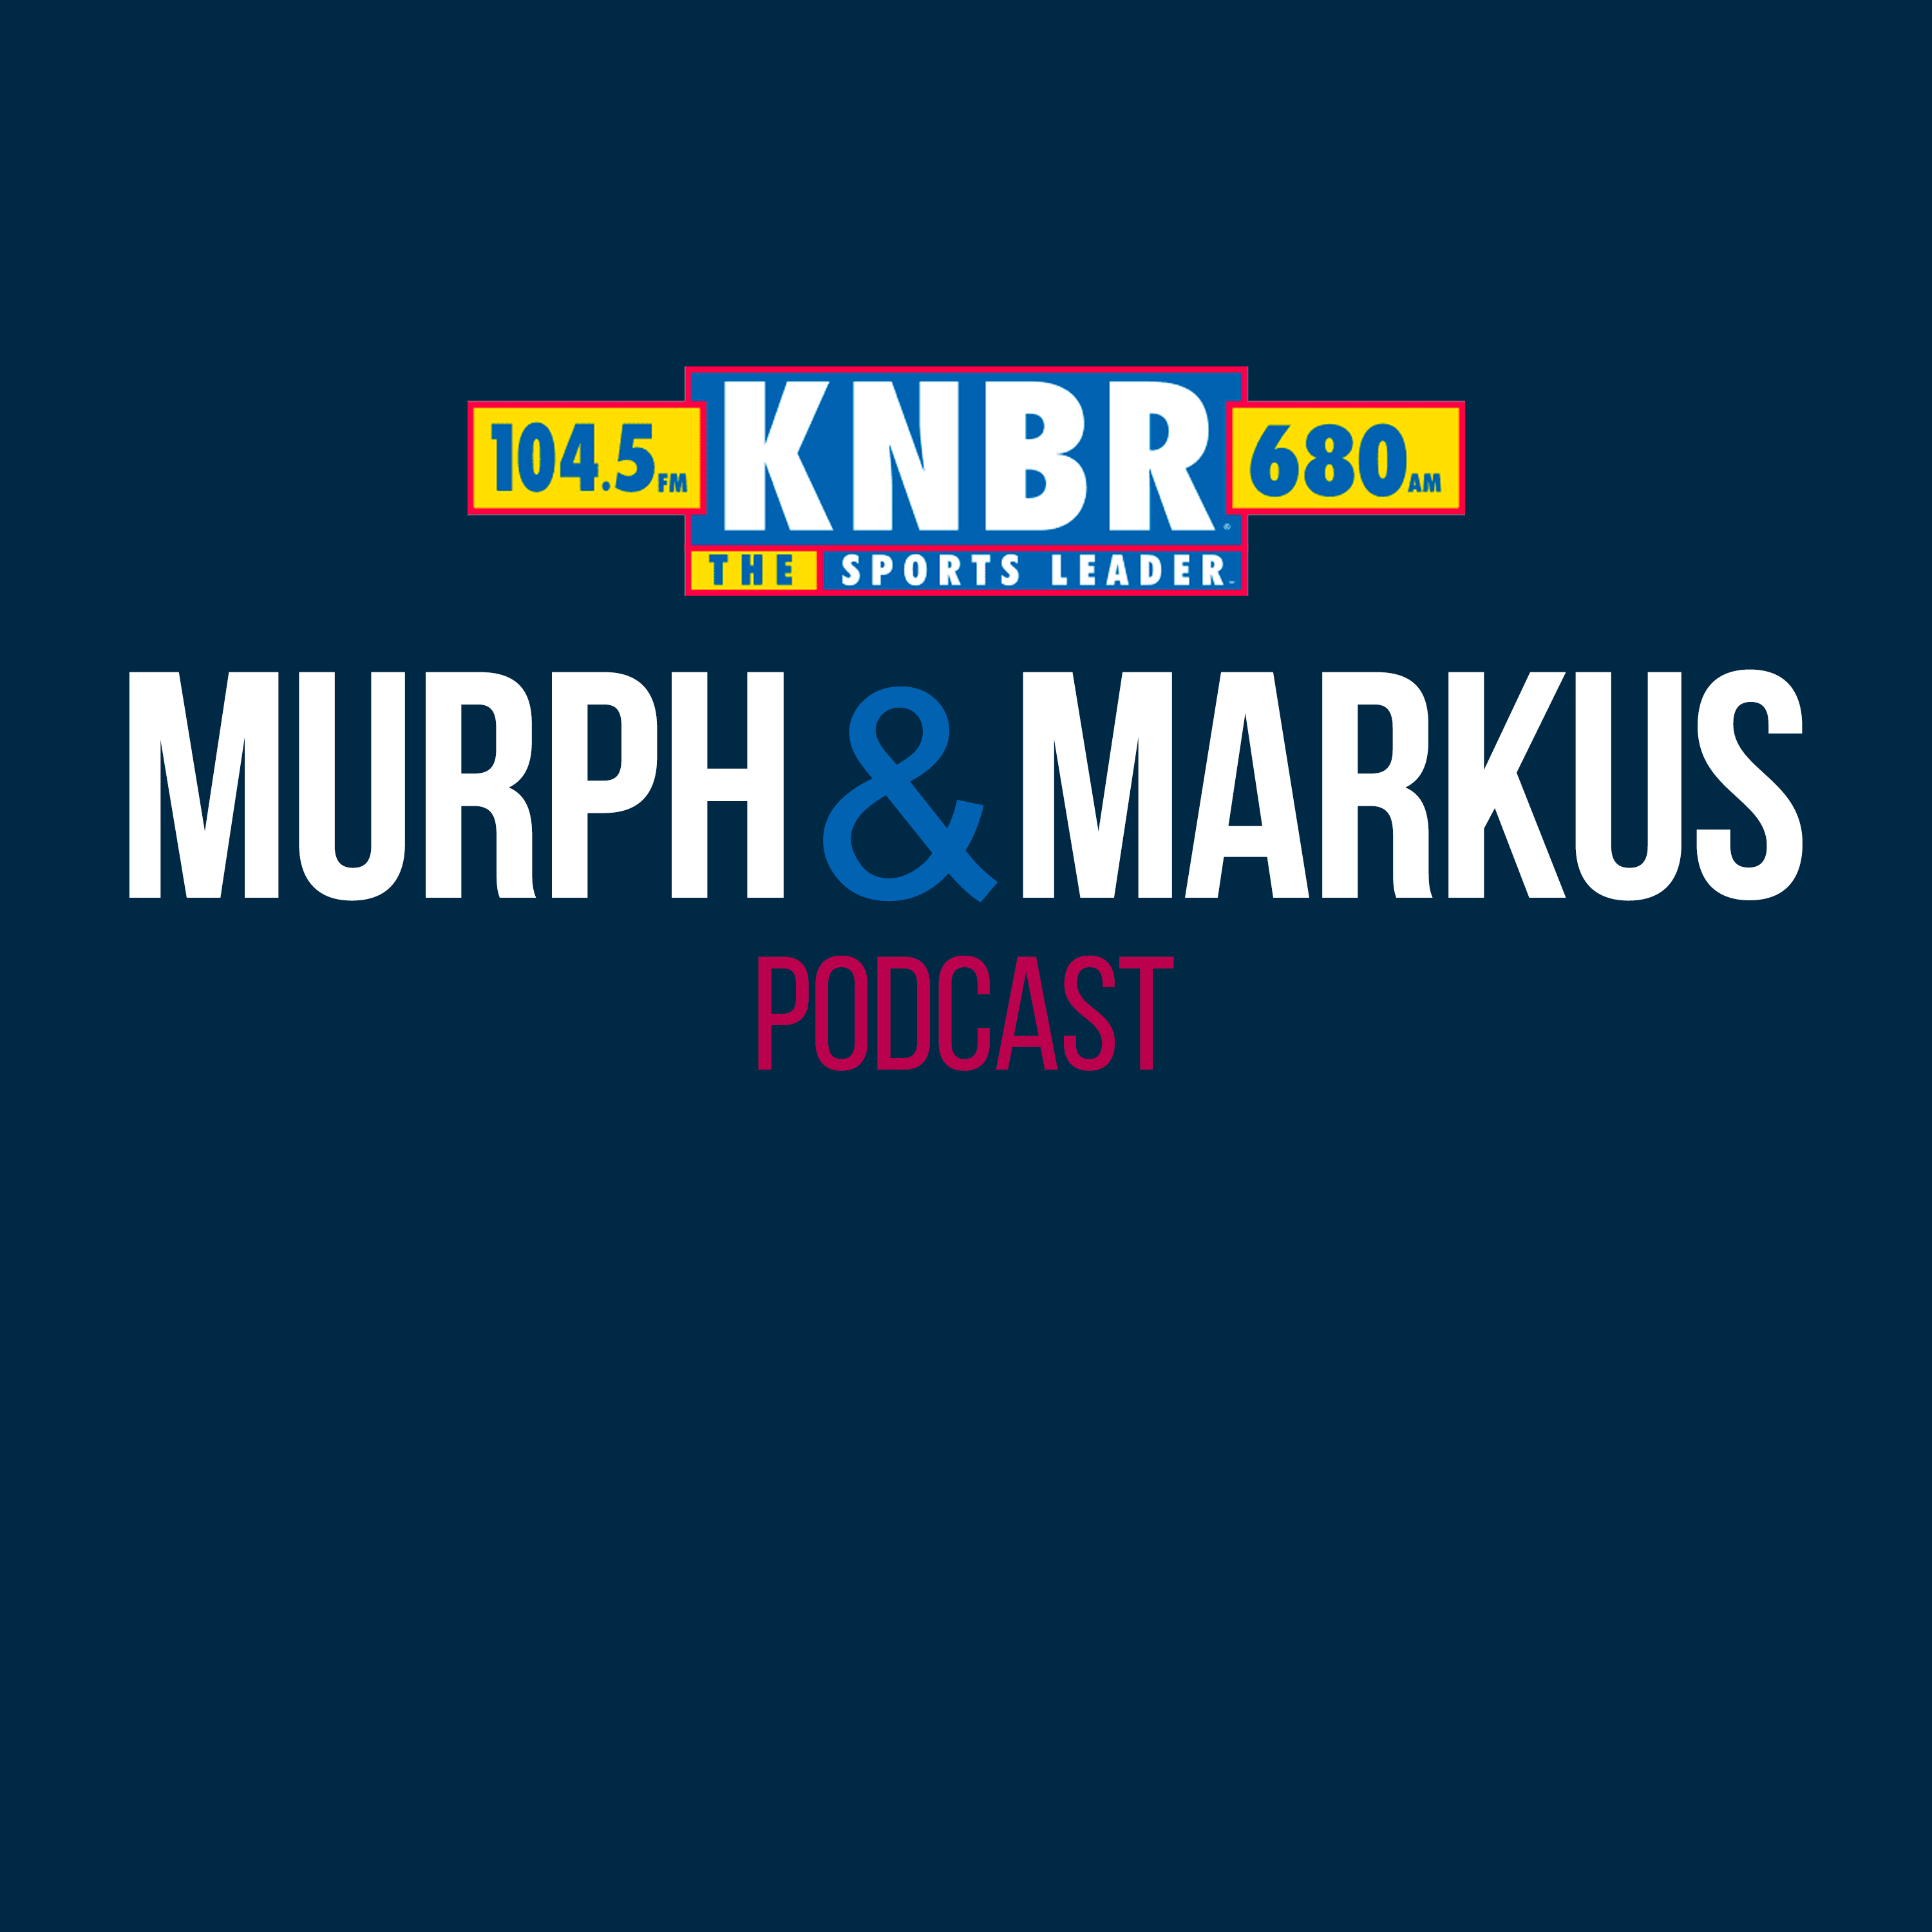 5-1 Hour 2: Murph & Markus discuss what went wrong last night at Fenway Park, talk to Mike Krukow, and get into today's top story in the Big Hit